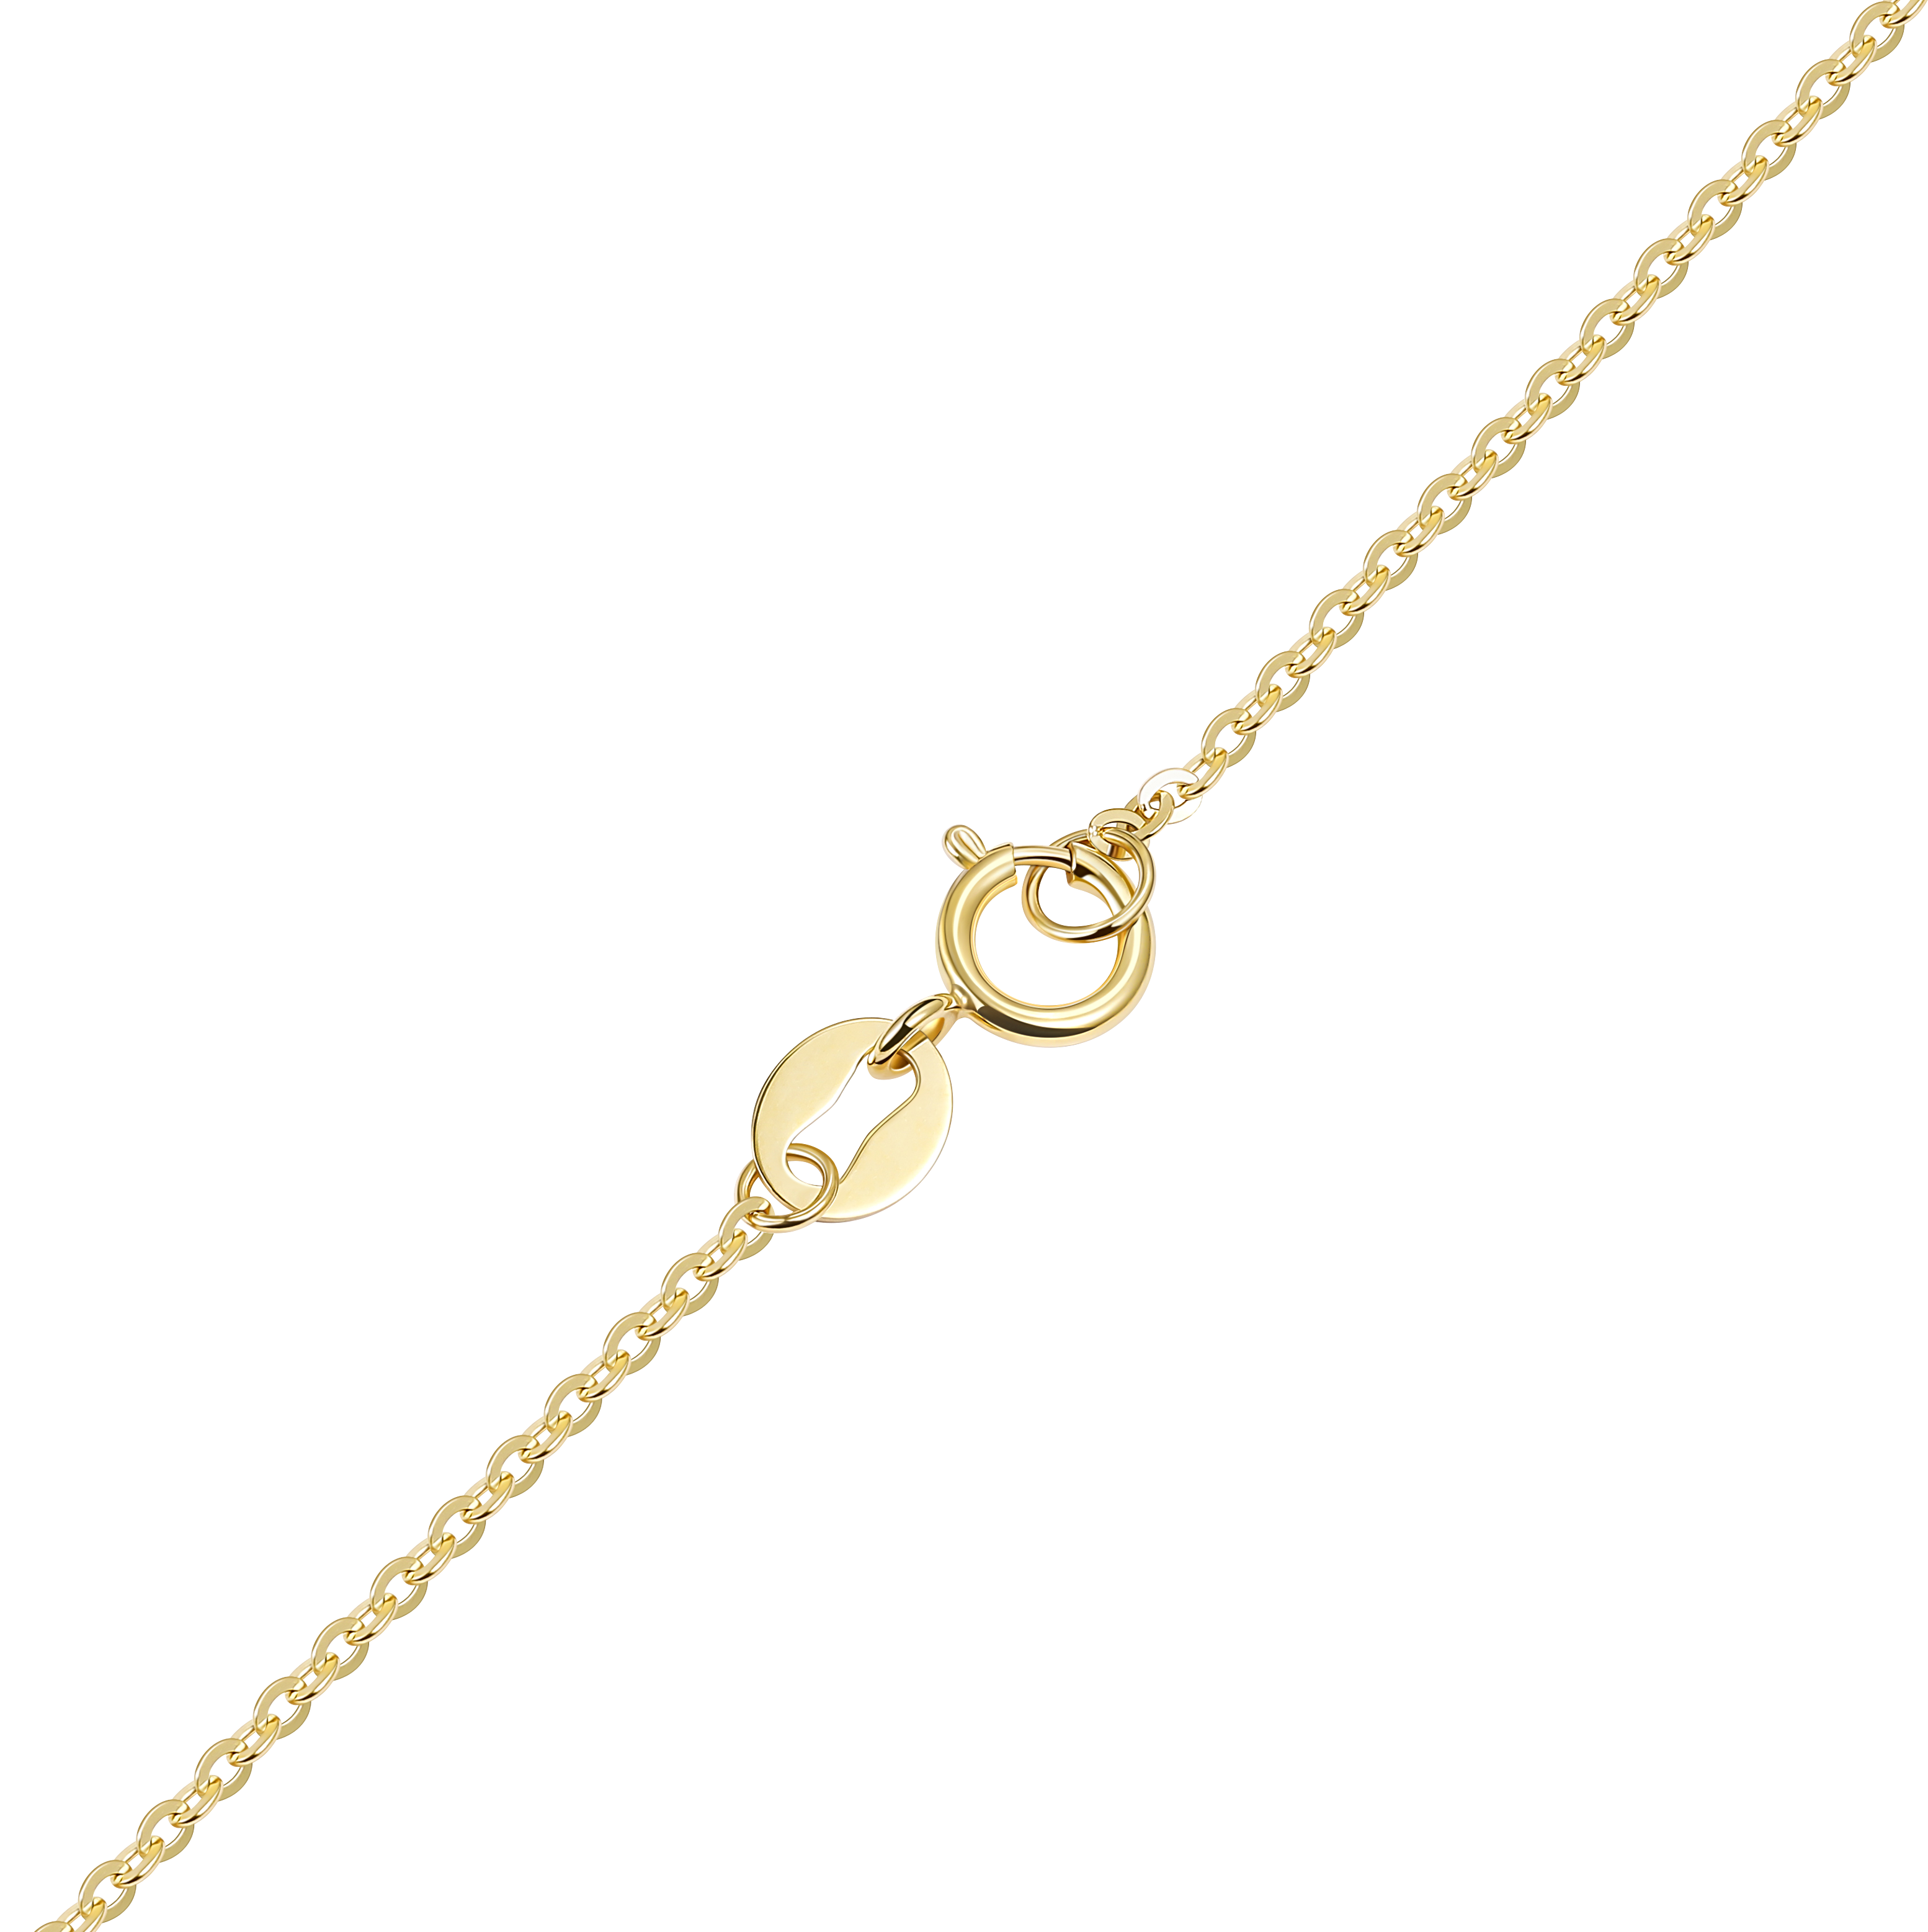 Solid Gold Birthstone Twist Pendant Necklace